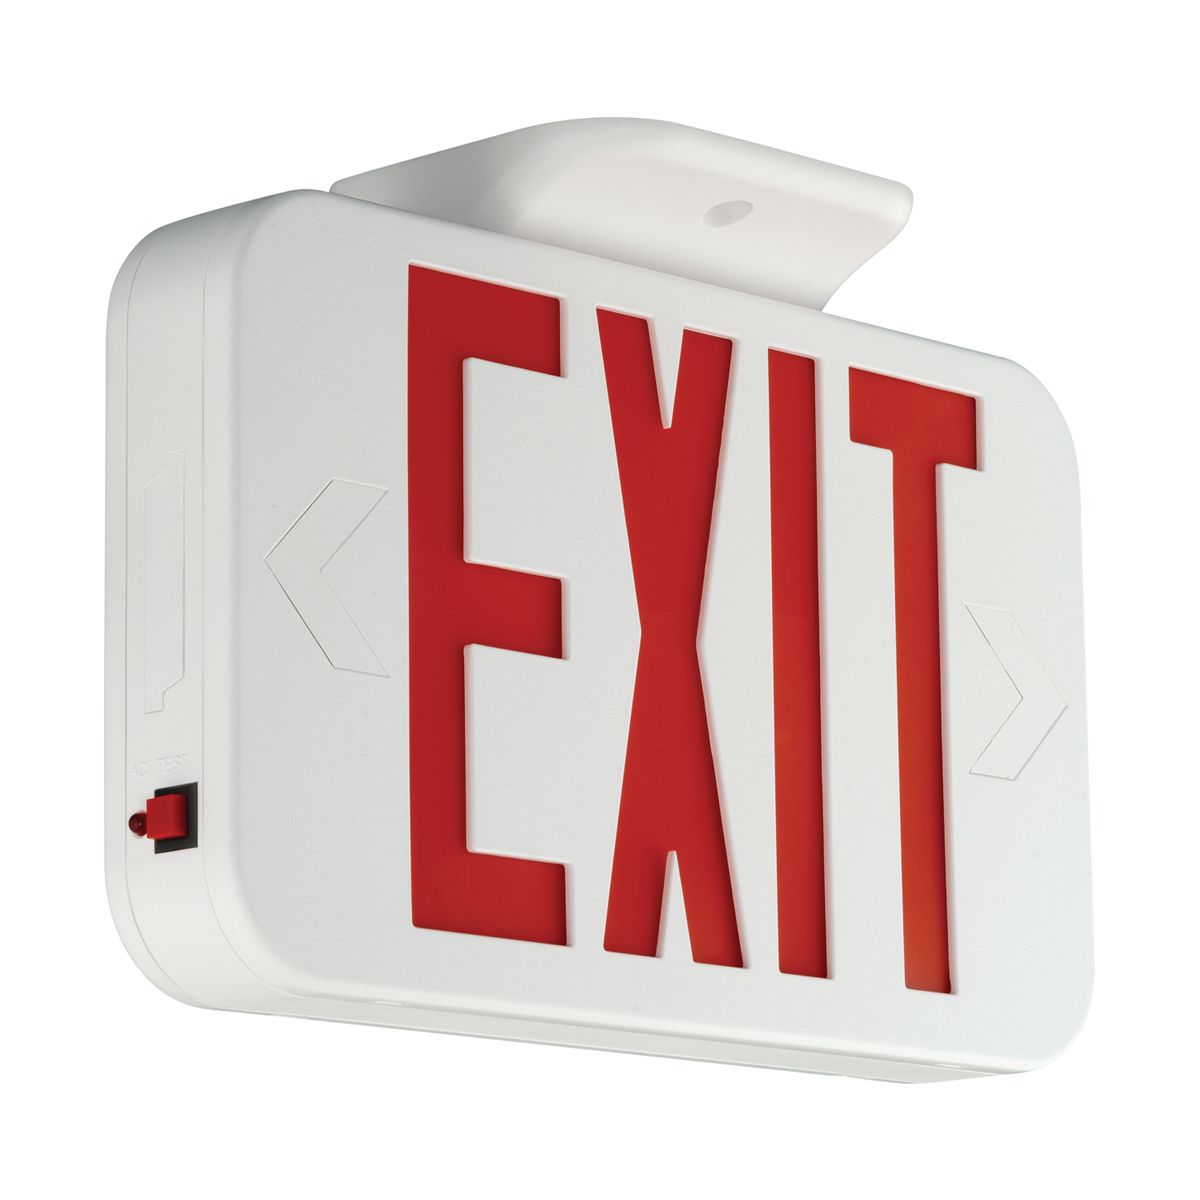 The Compass emergency exit sign offers quality and value with a compact and attractive LED based emergency exit sign with green letters. The white housing is made of high impact, UL flame rated thermoplastic. Snap together canopy, housing and removable chevrons for quick and easy installation. The CEG can be applied in stair-wells, hallways, offices and other commercial applications.